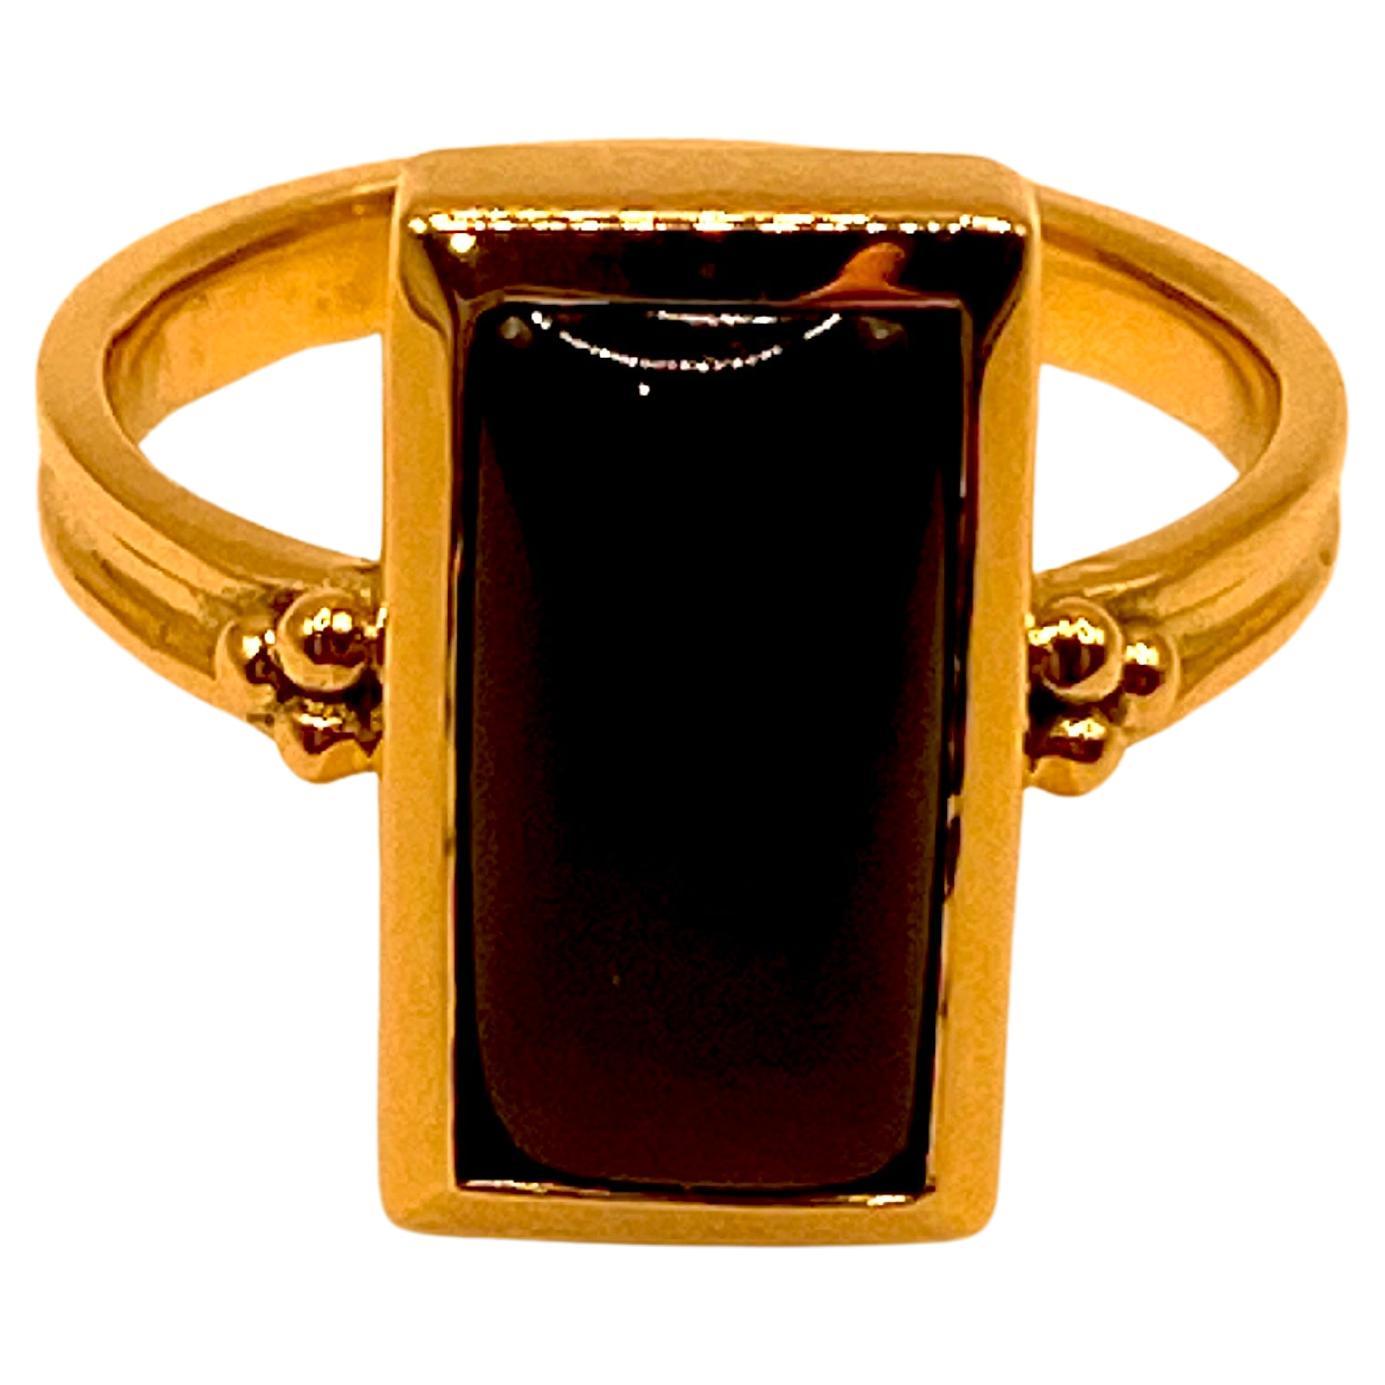 22 Karat Gold Garnet Ring by Romae Jewelry - Inspired by Ancient Designs